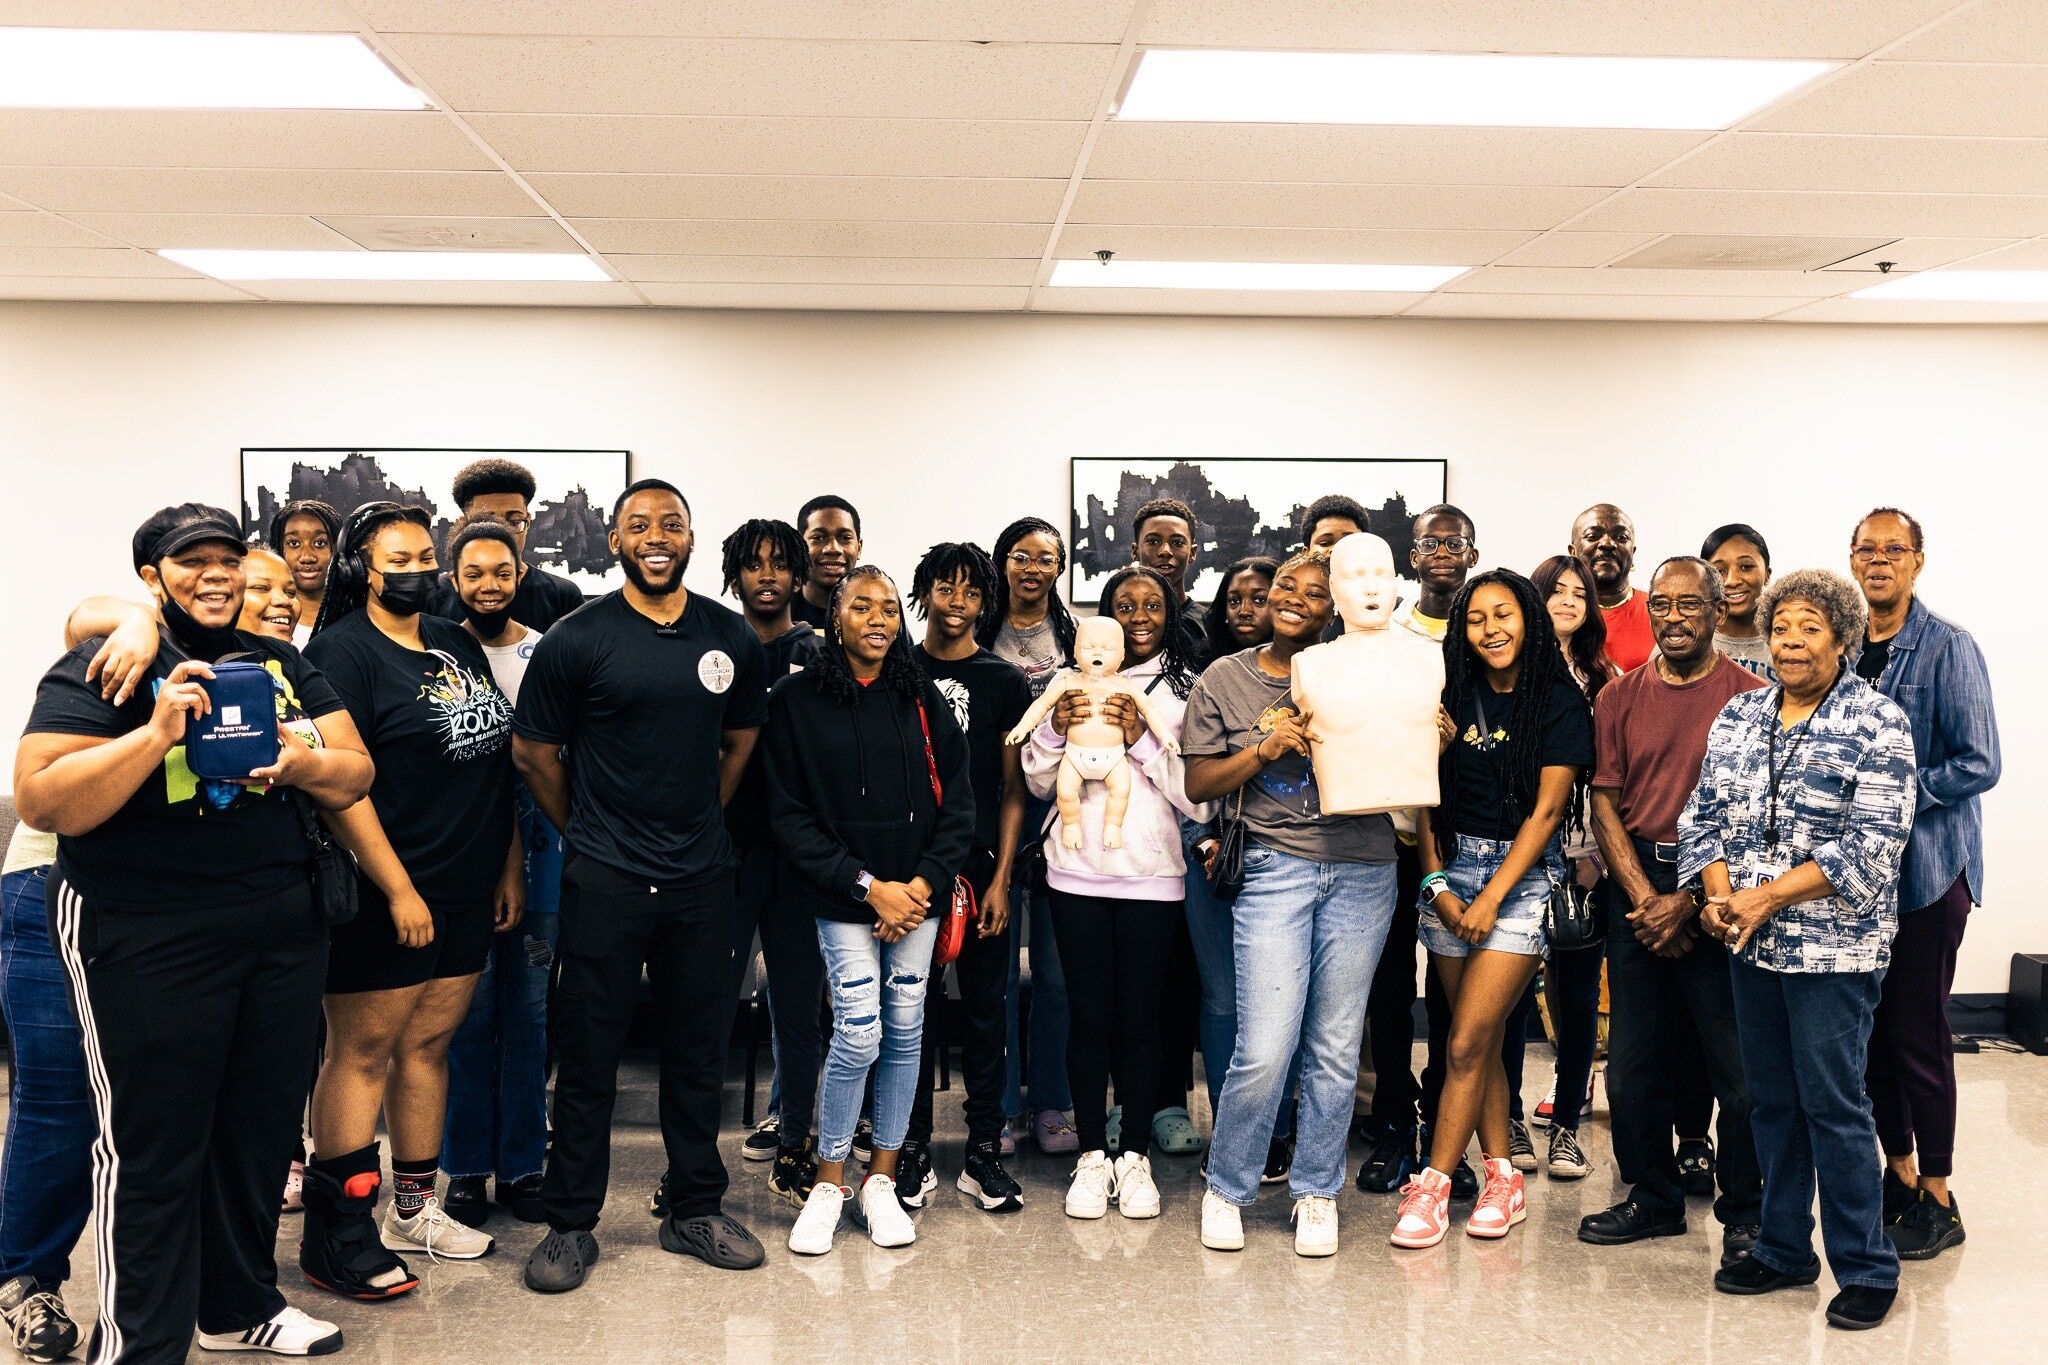 Group picture with Prince George's County, Maryland-based Good Works